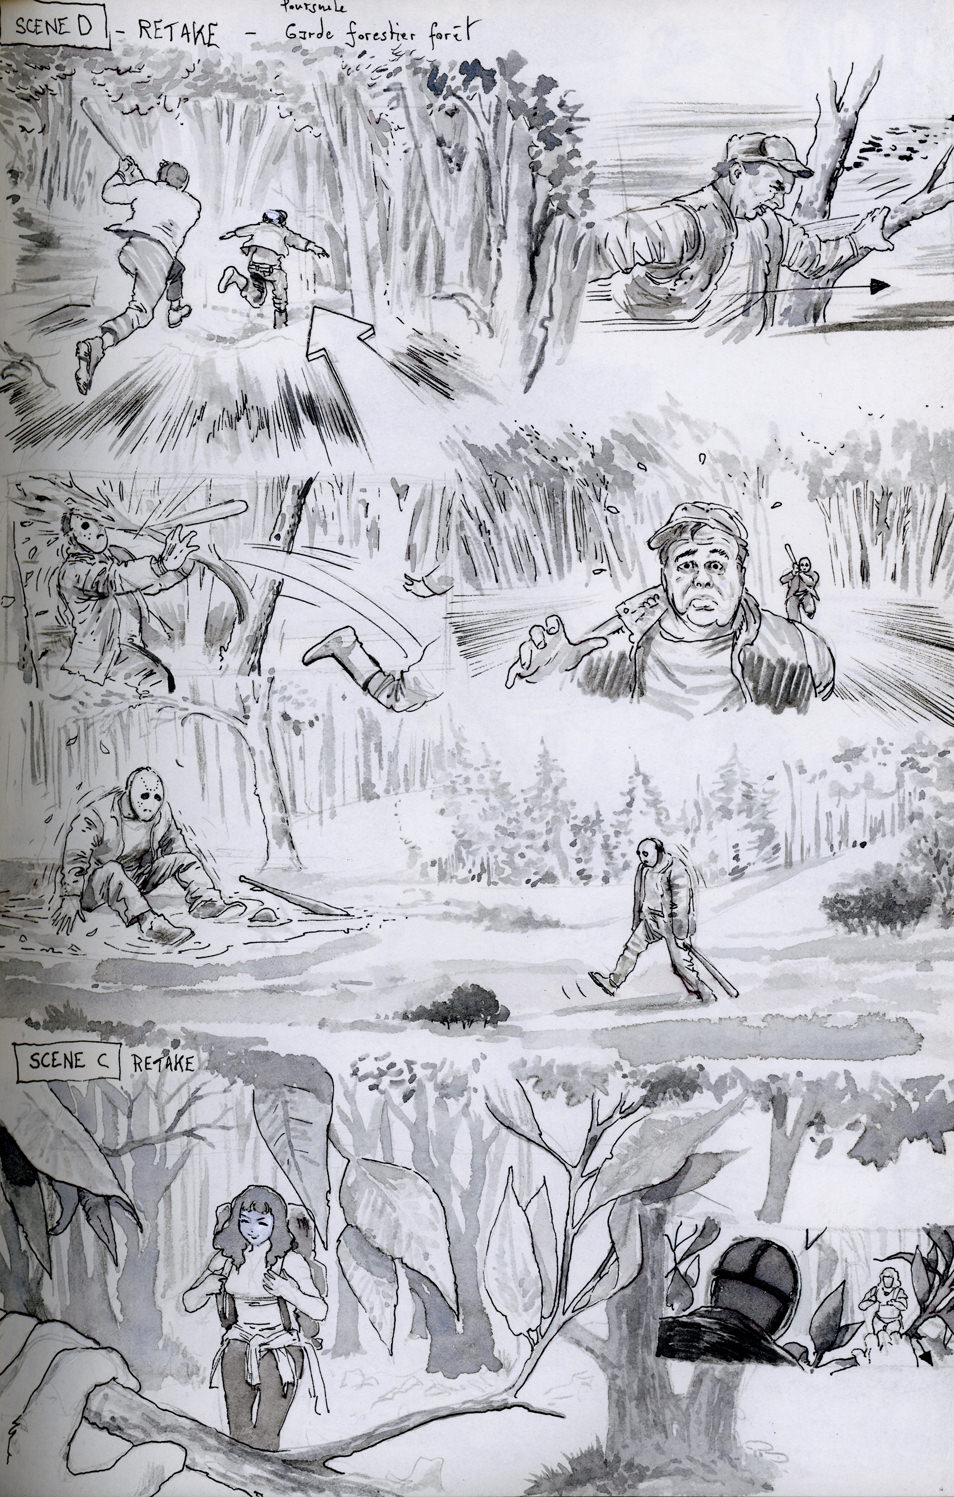 Storyboard page sketches